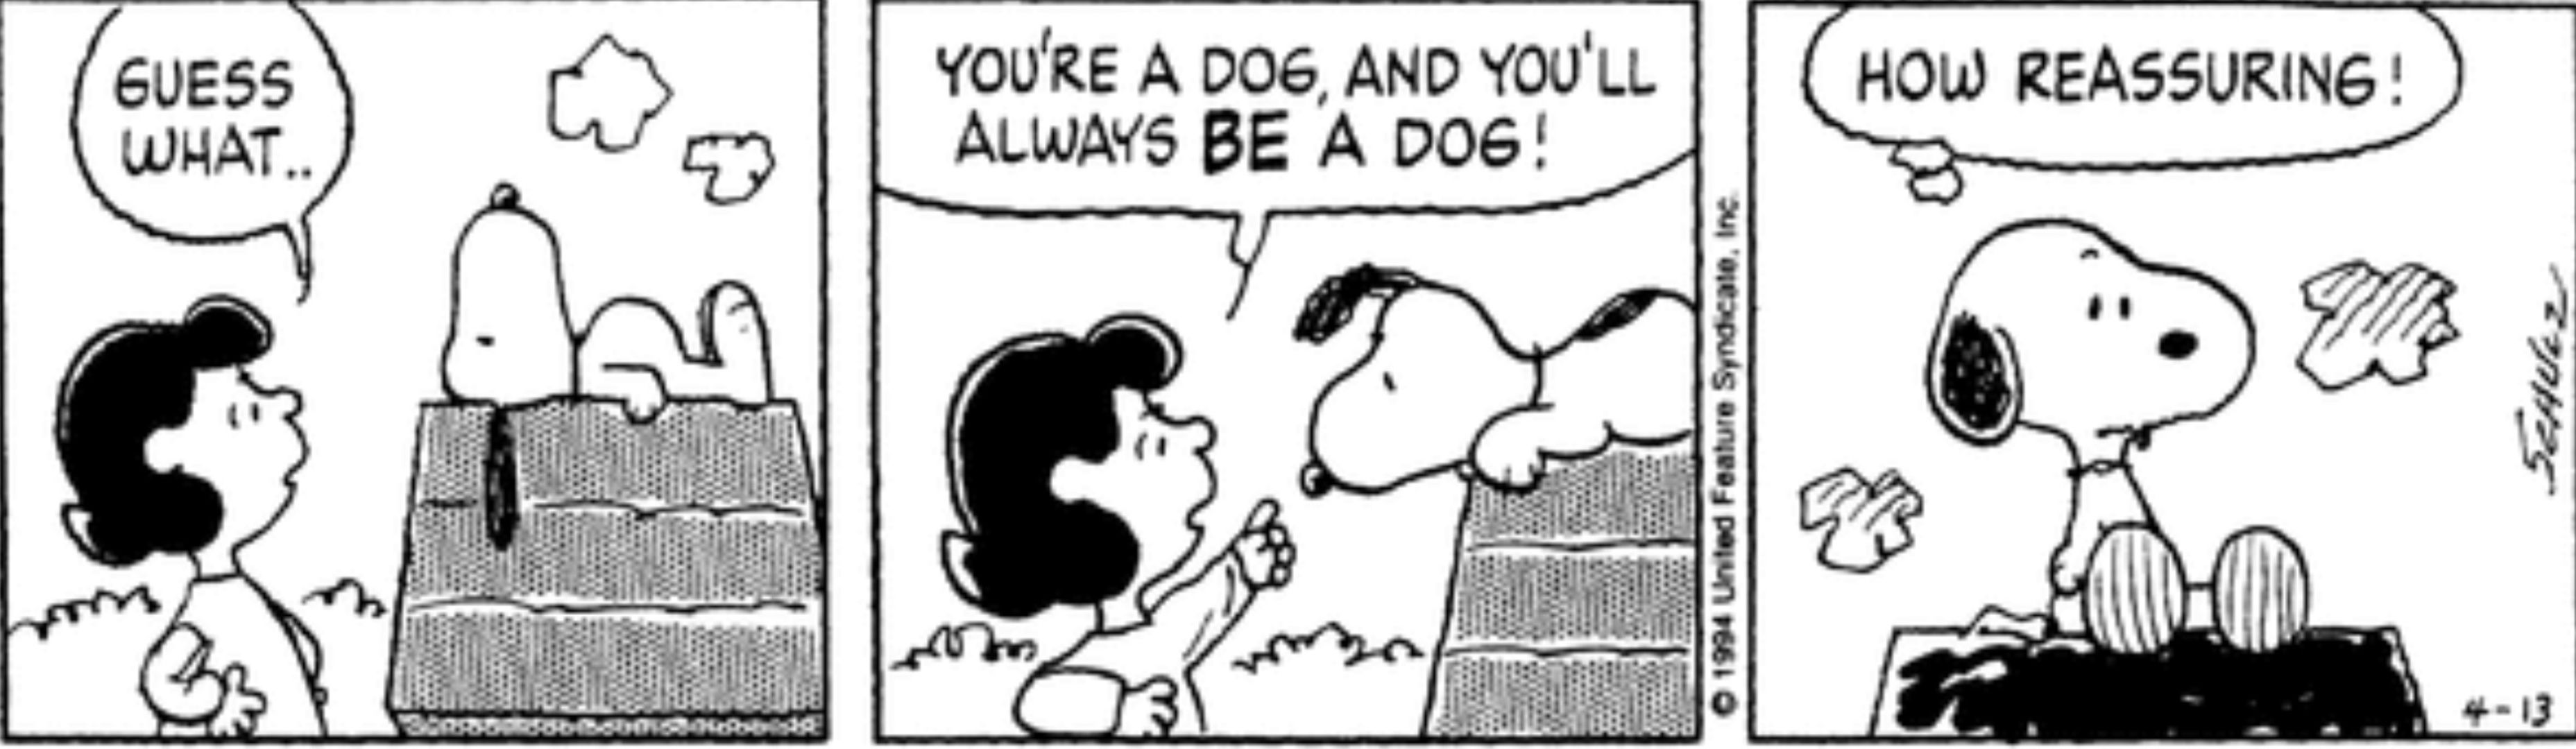 Peanuts, Lucy yells at Snoopy that he'll always be a dog.